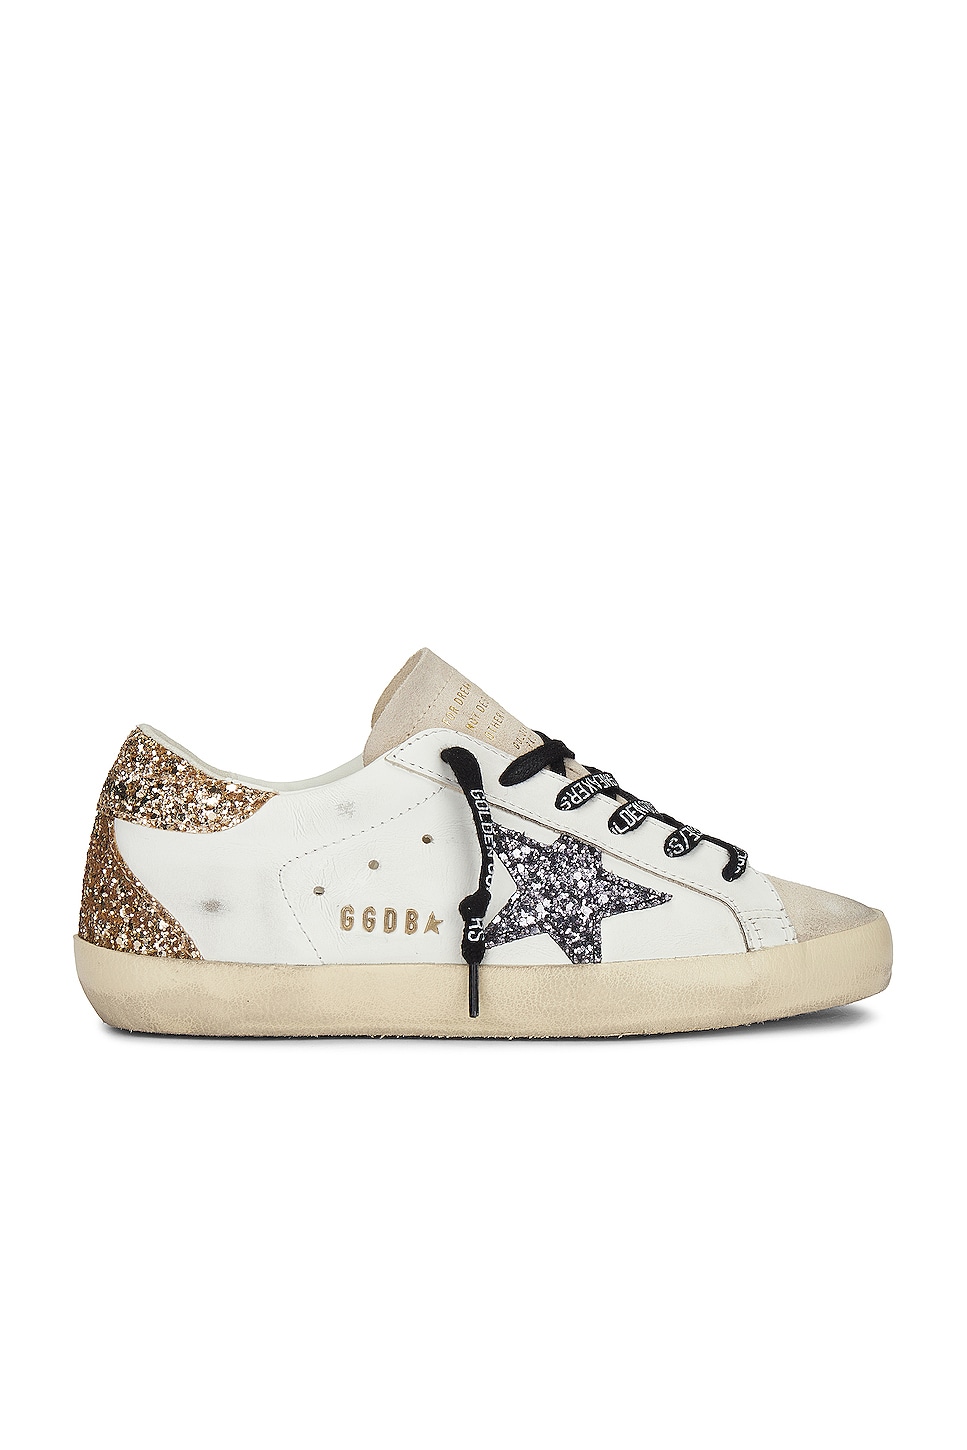 Image 1 of Golden Goose Super Star Leather Sneaker in Optic White, Seed Pearl, Black & Gold